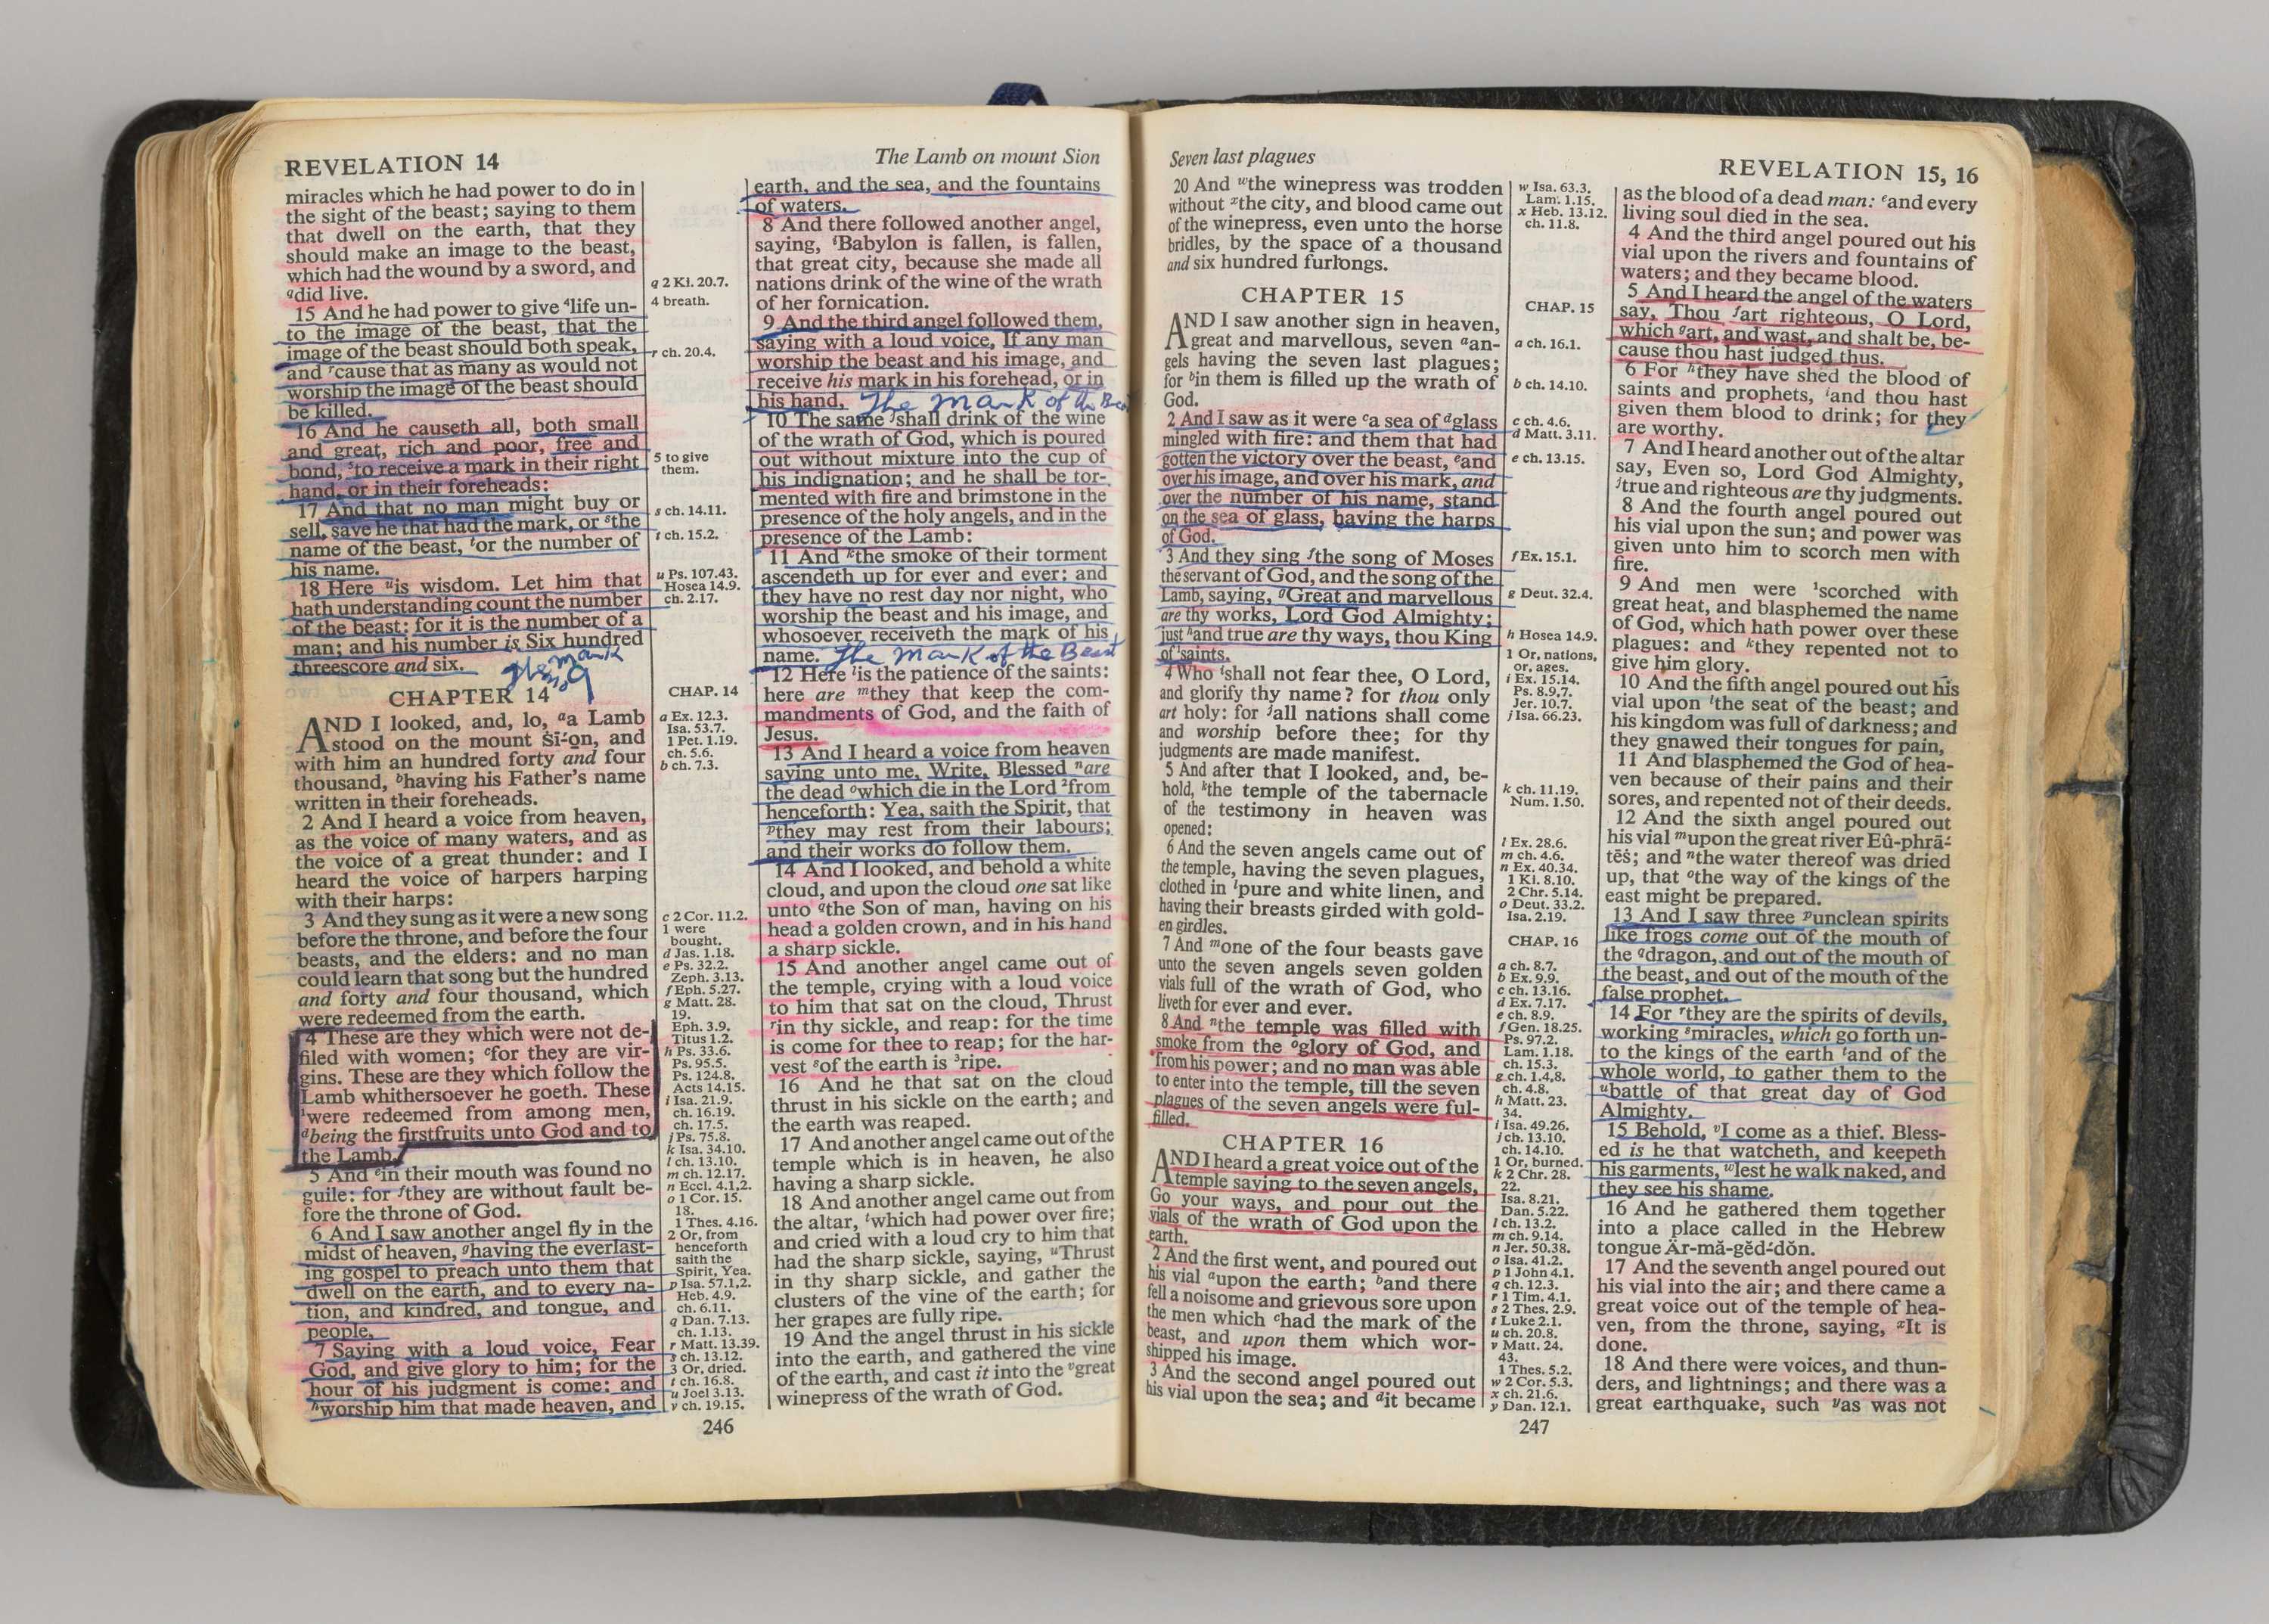 Photograph of inside pages of Bible showing handwritten notes and highlighting.